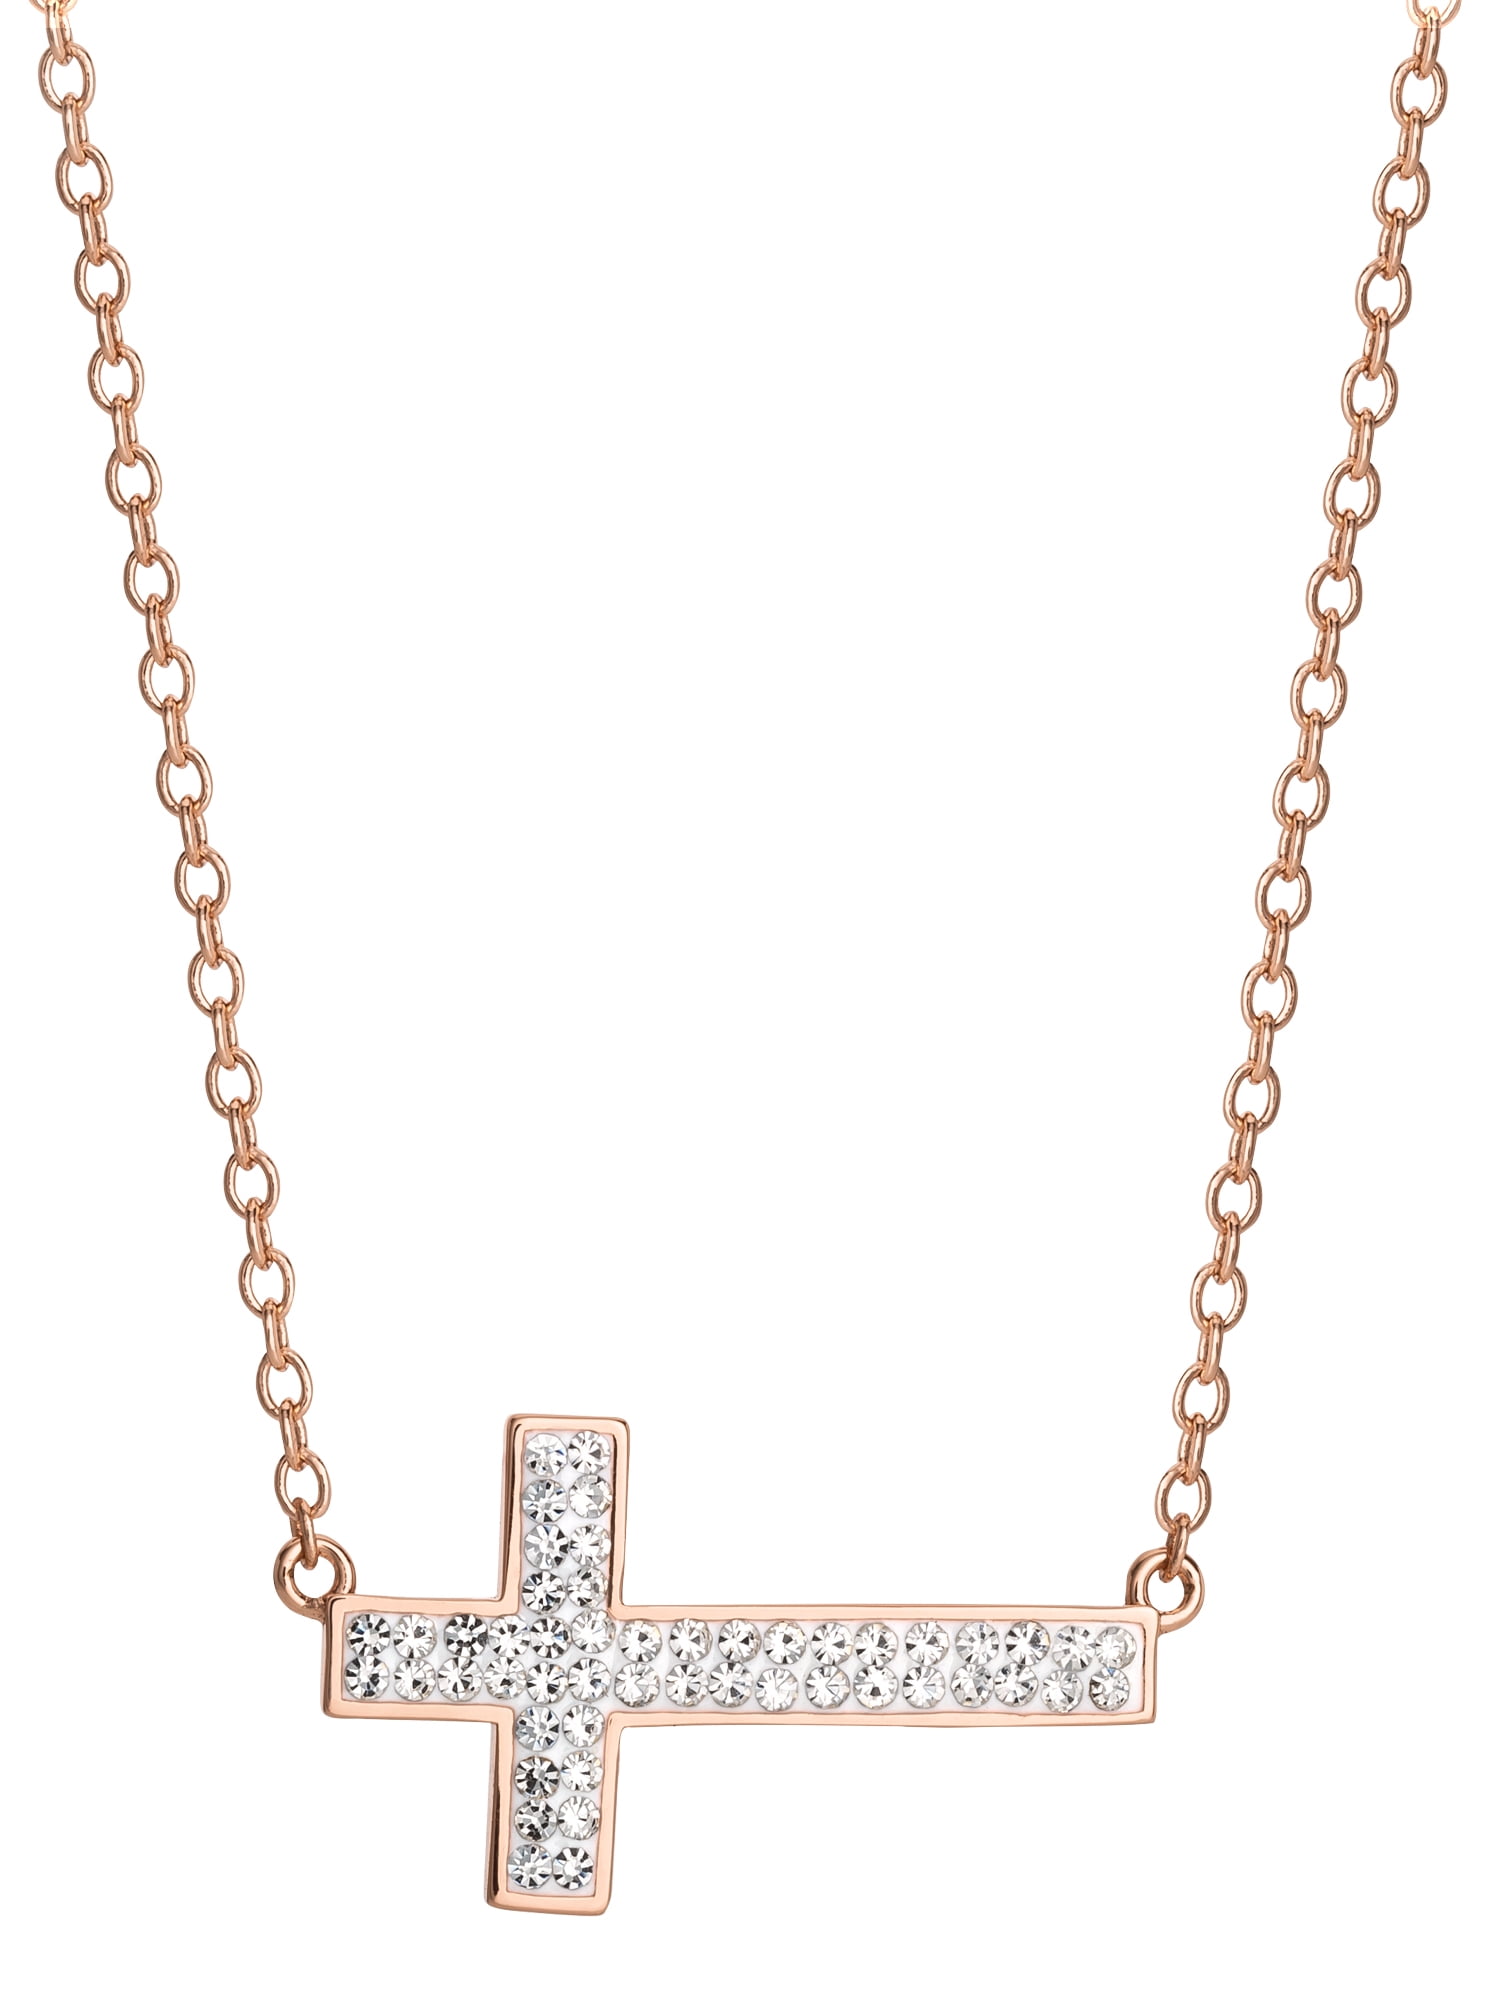 Brilliance Sterling Silver 14KT Gold Plated Crystal Cross Pendant Necklace, 18" chain